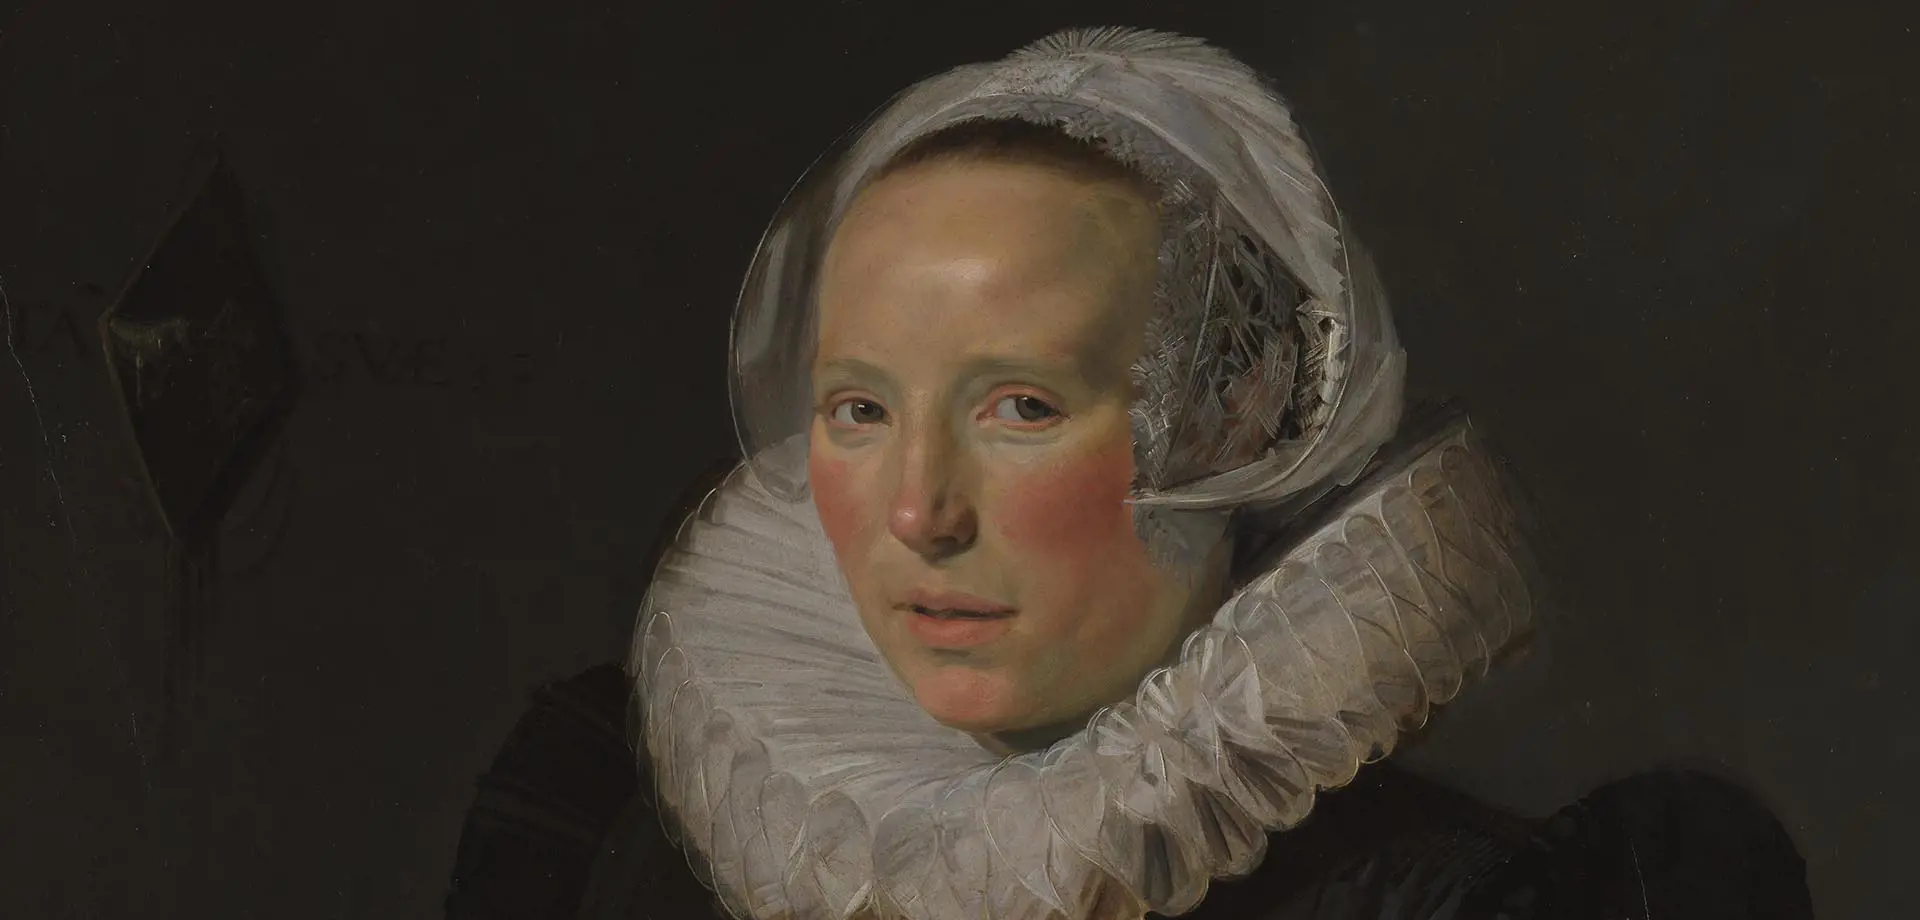 Frans Hals paintings on show at the National Gallery